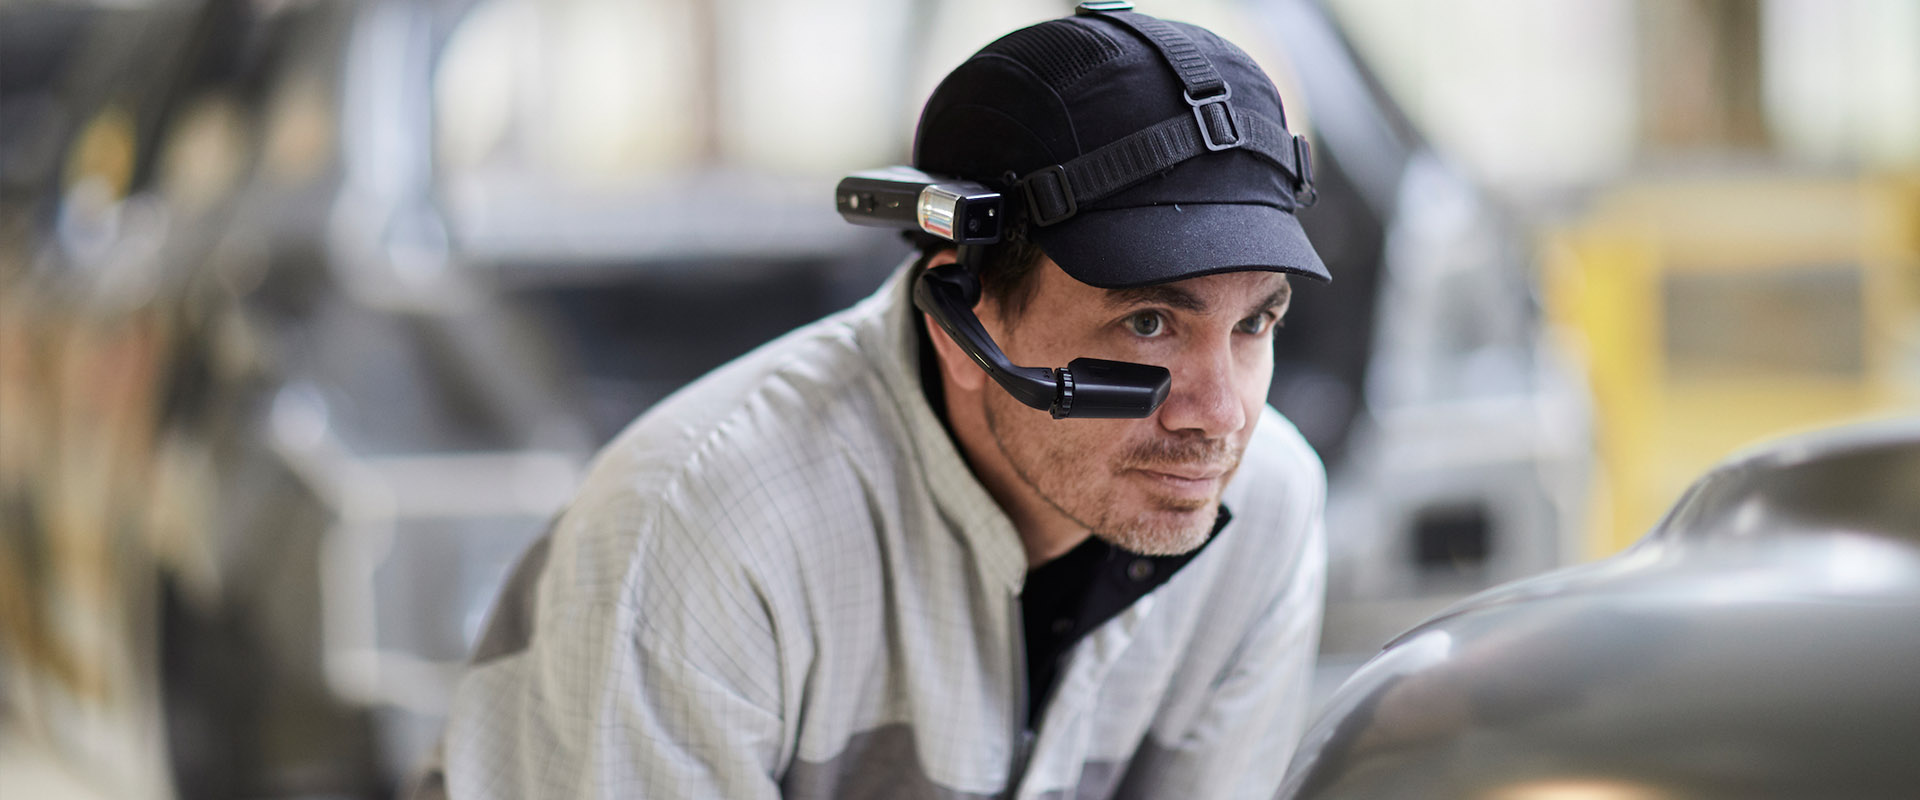 Man offering an industry solution AR headset